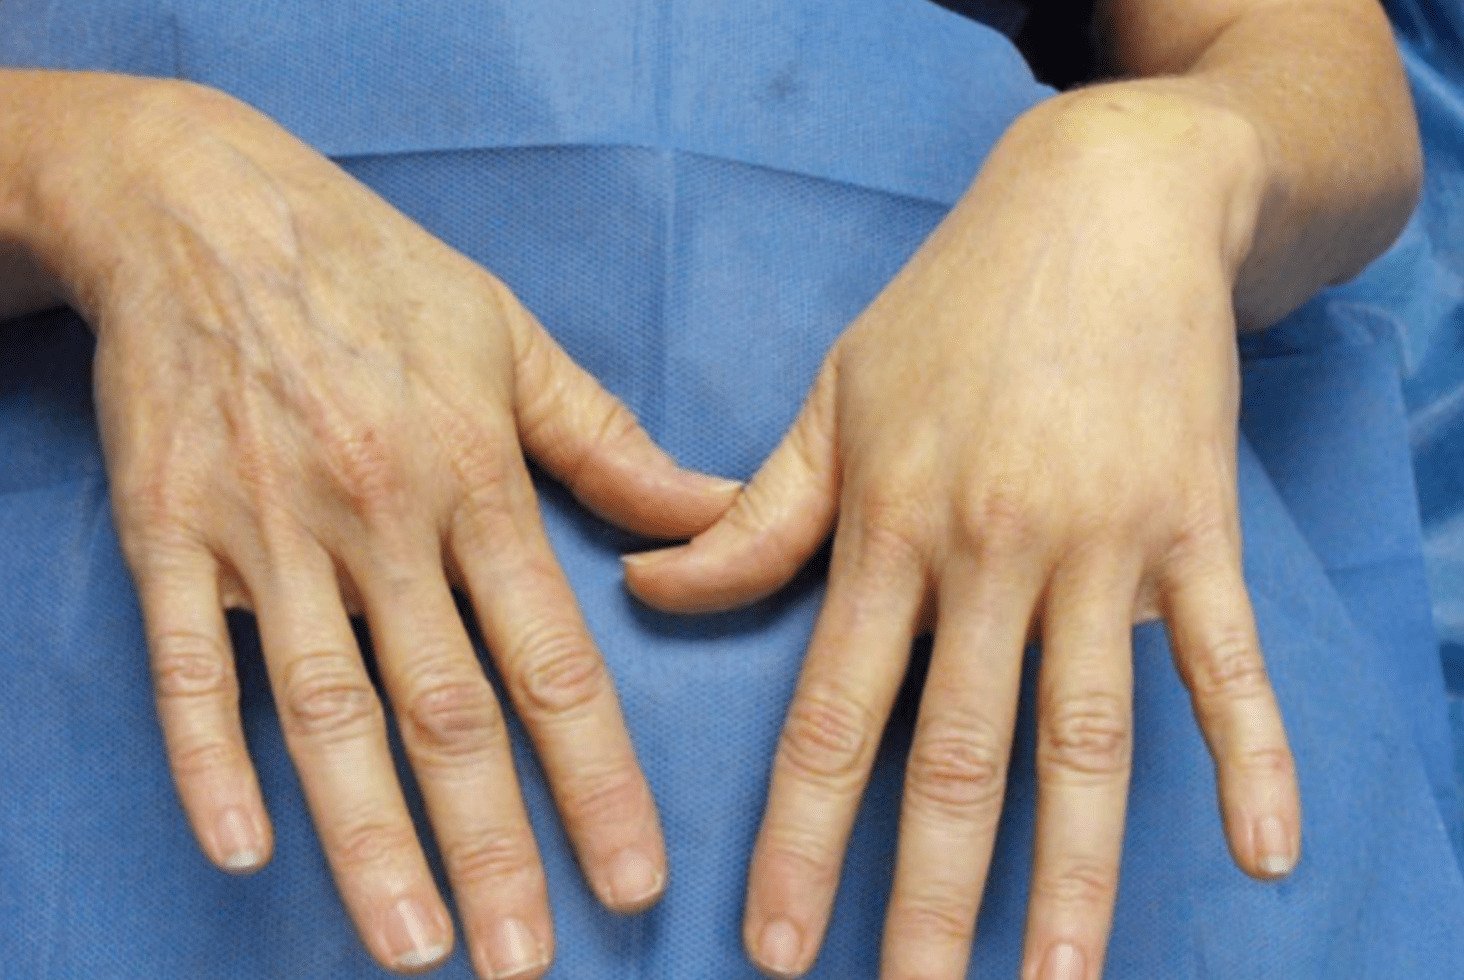 Patient's hands before and after hand fat grafting